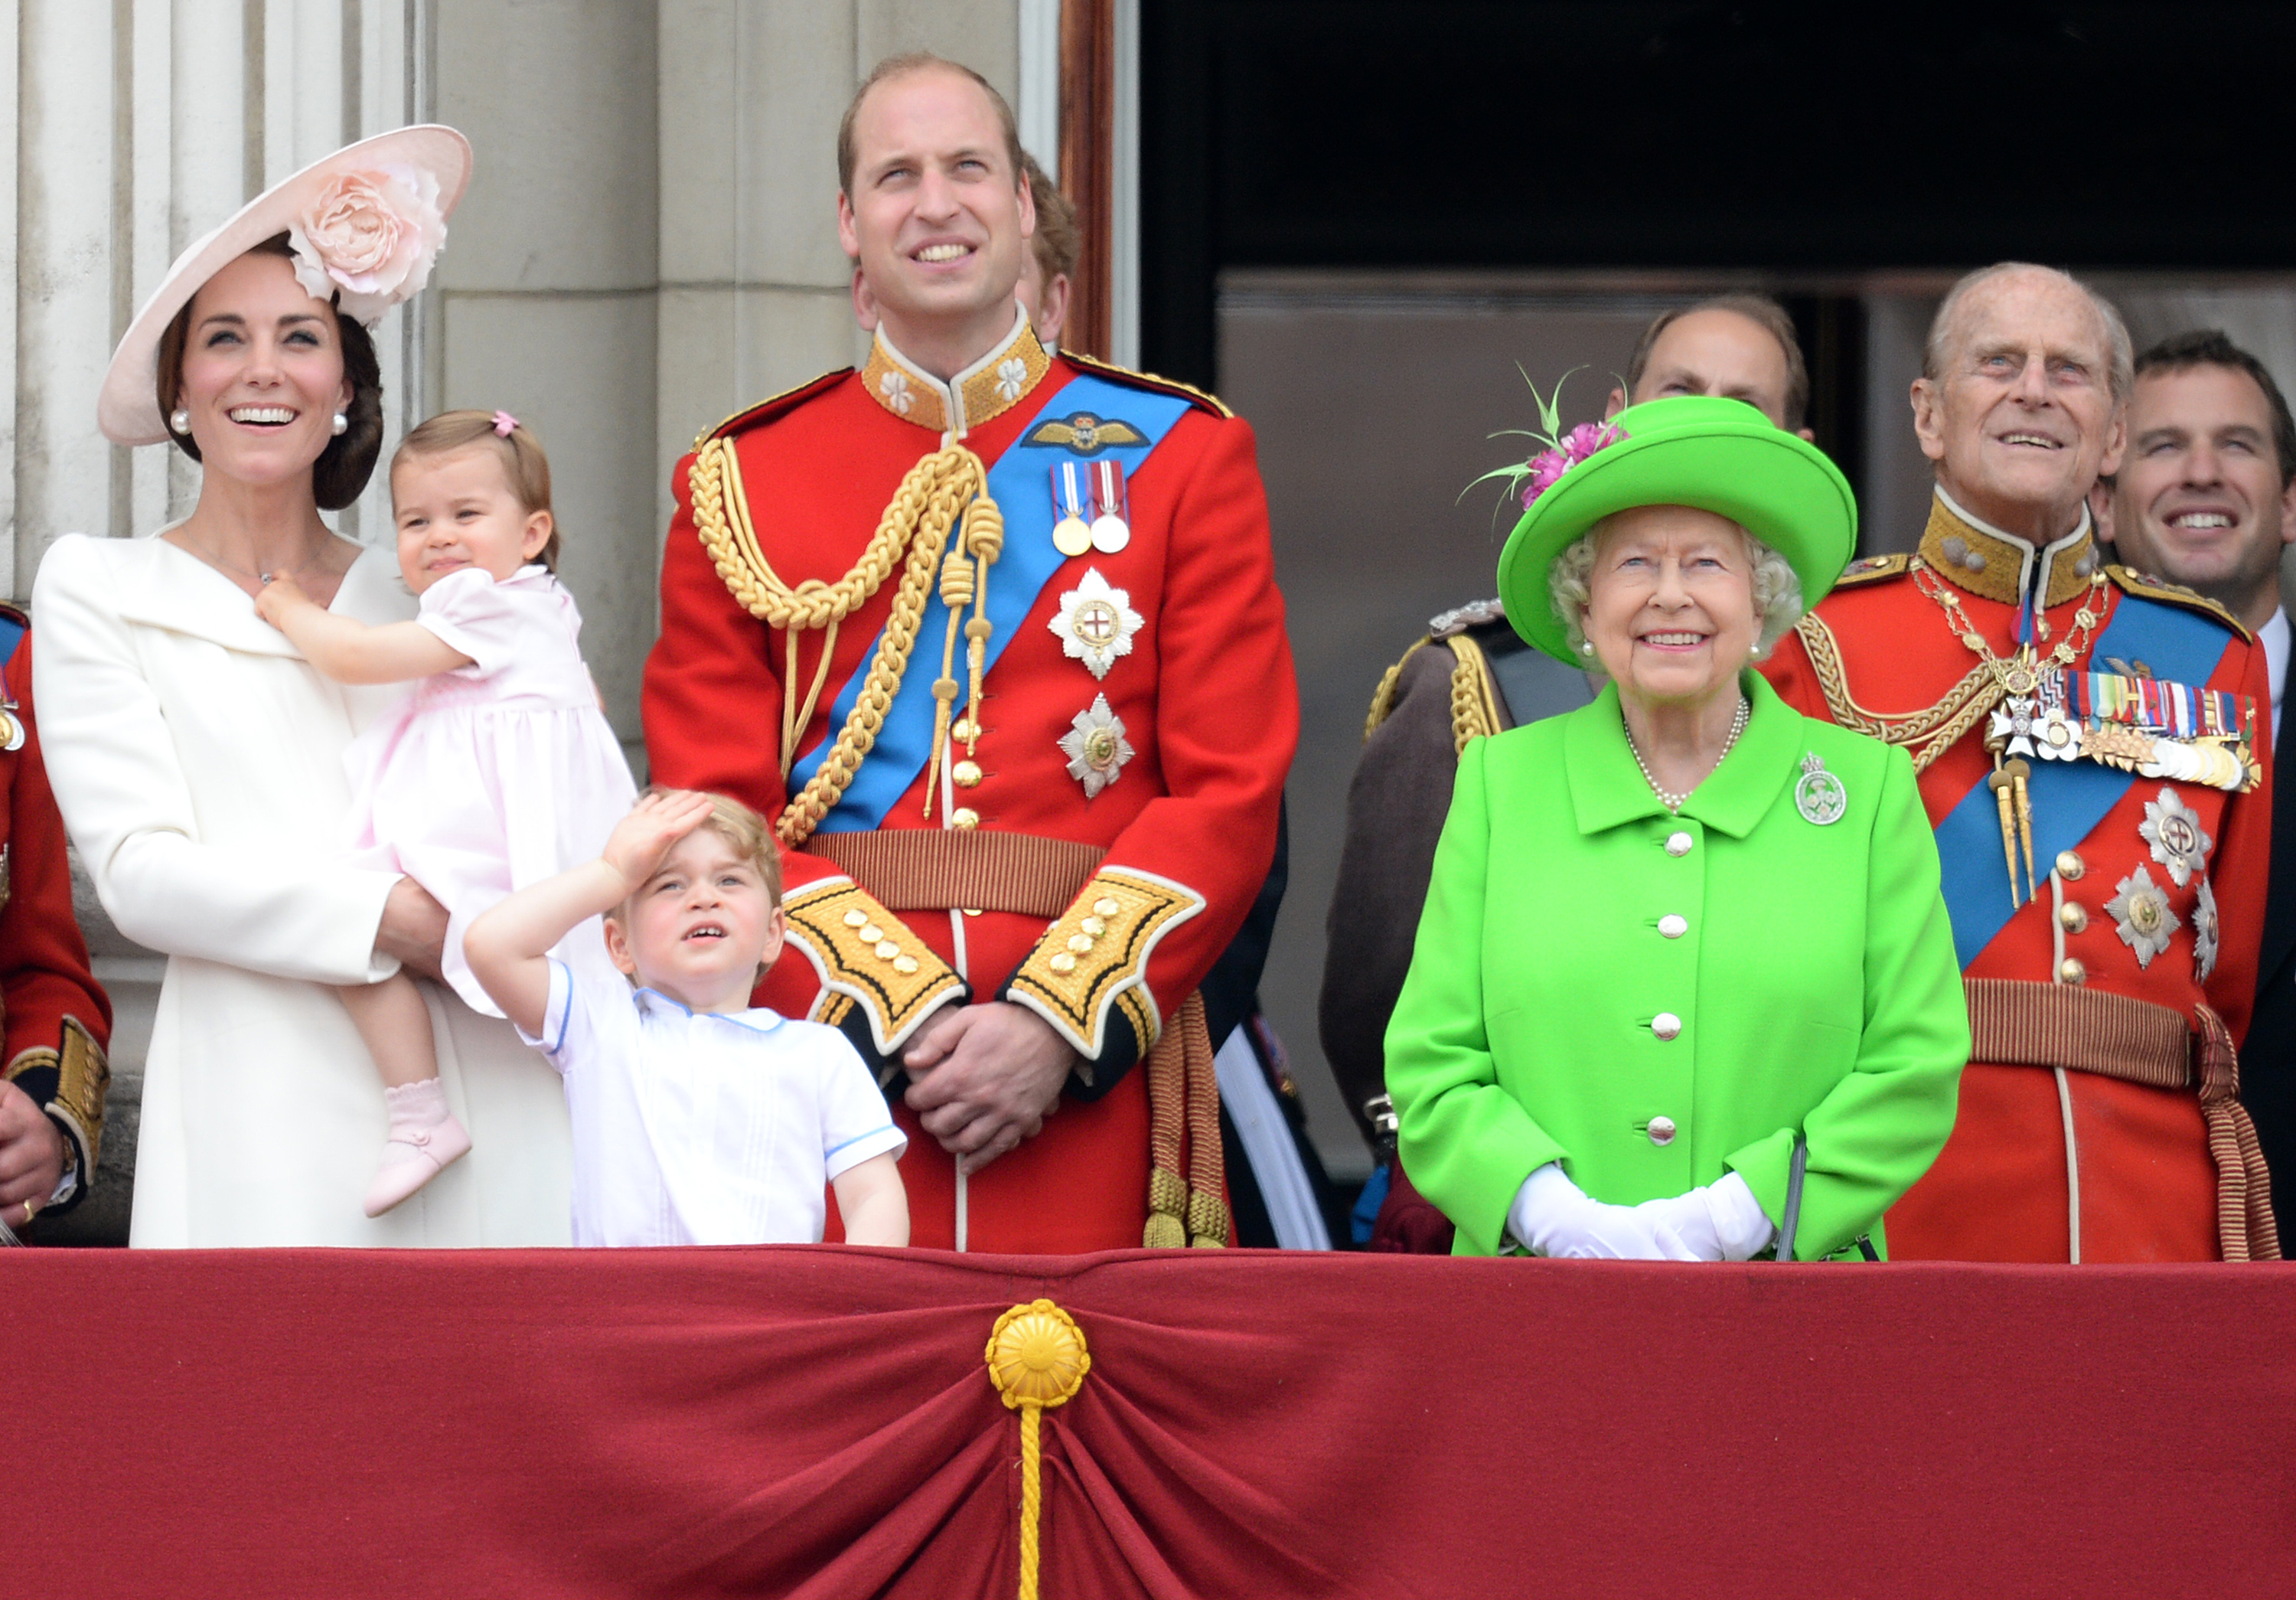 The Royal Family during the Trooping the Colour, this year marking the Queen's official 90th birthday at The Mall in London, England on June 11, 2016 (DZY—Getty)